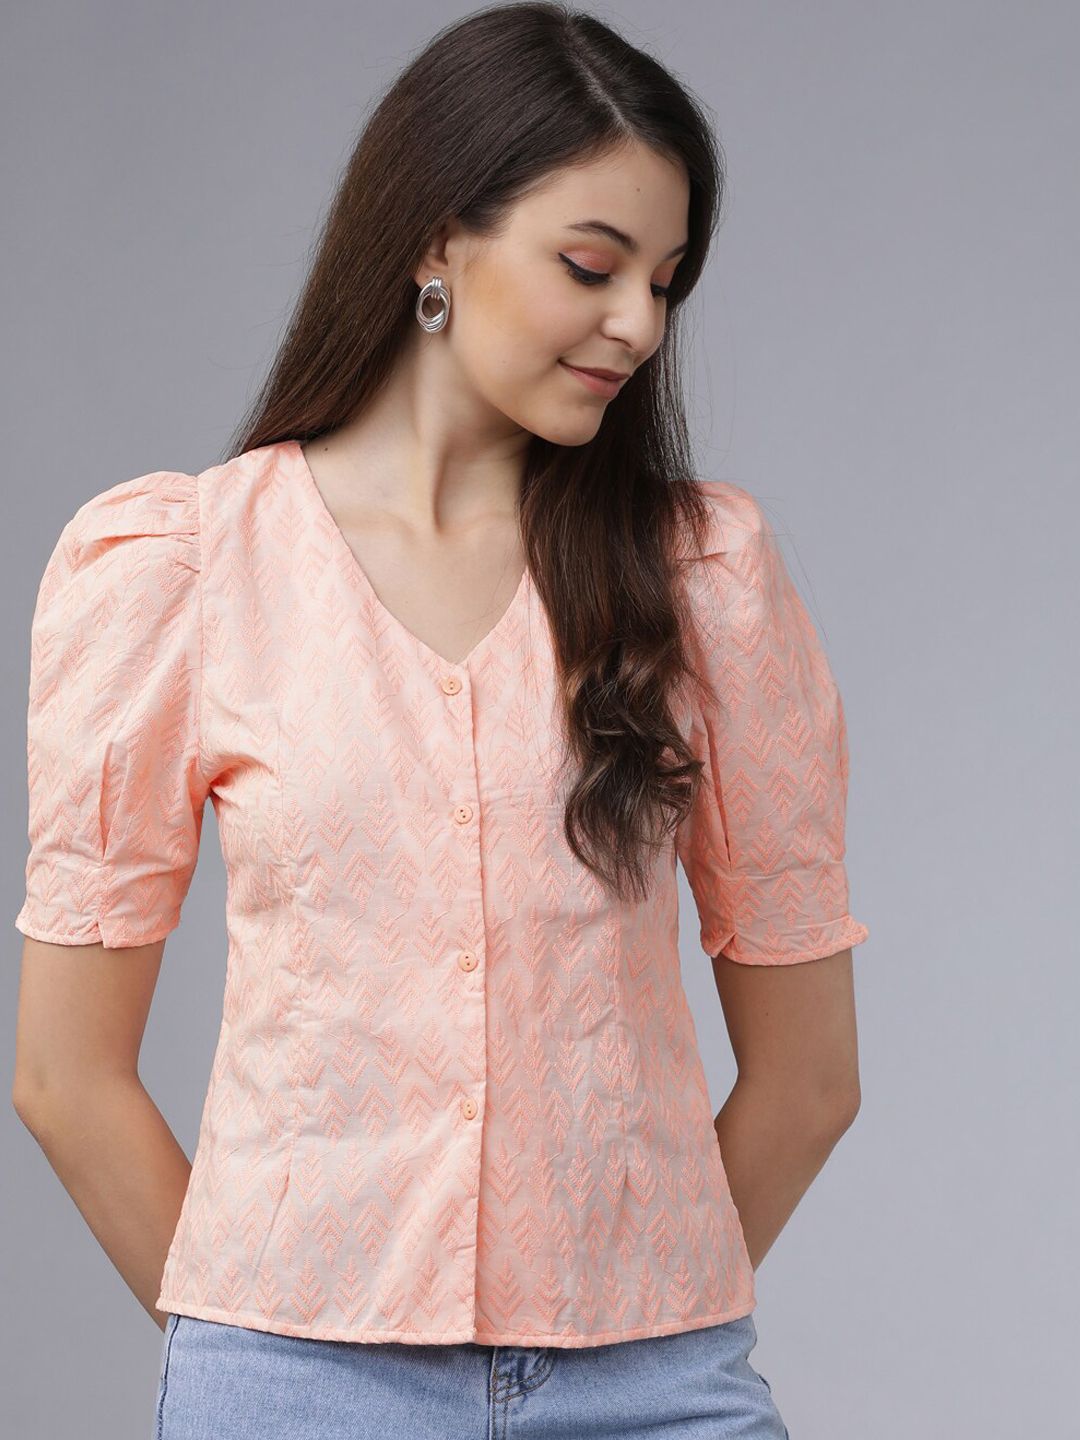 Tokyo Talkies Peach Embroidered Shirt Style Top Price in India